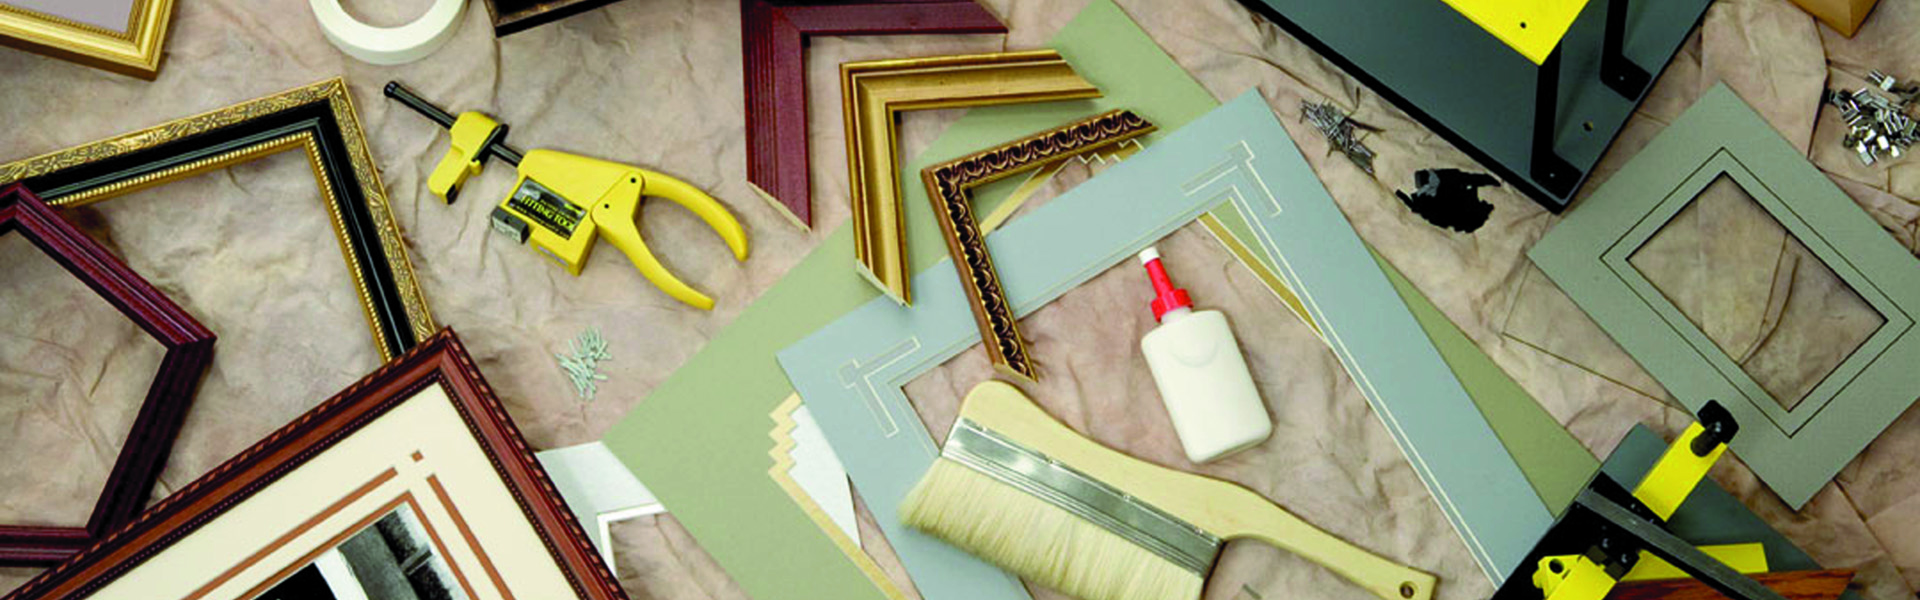 Picture Framing Supplies Materials and Equipment